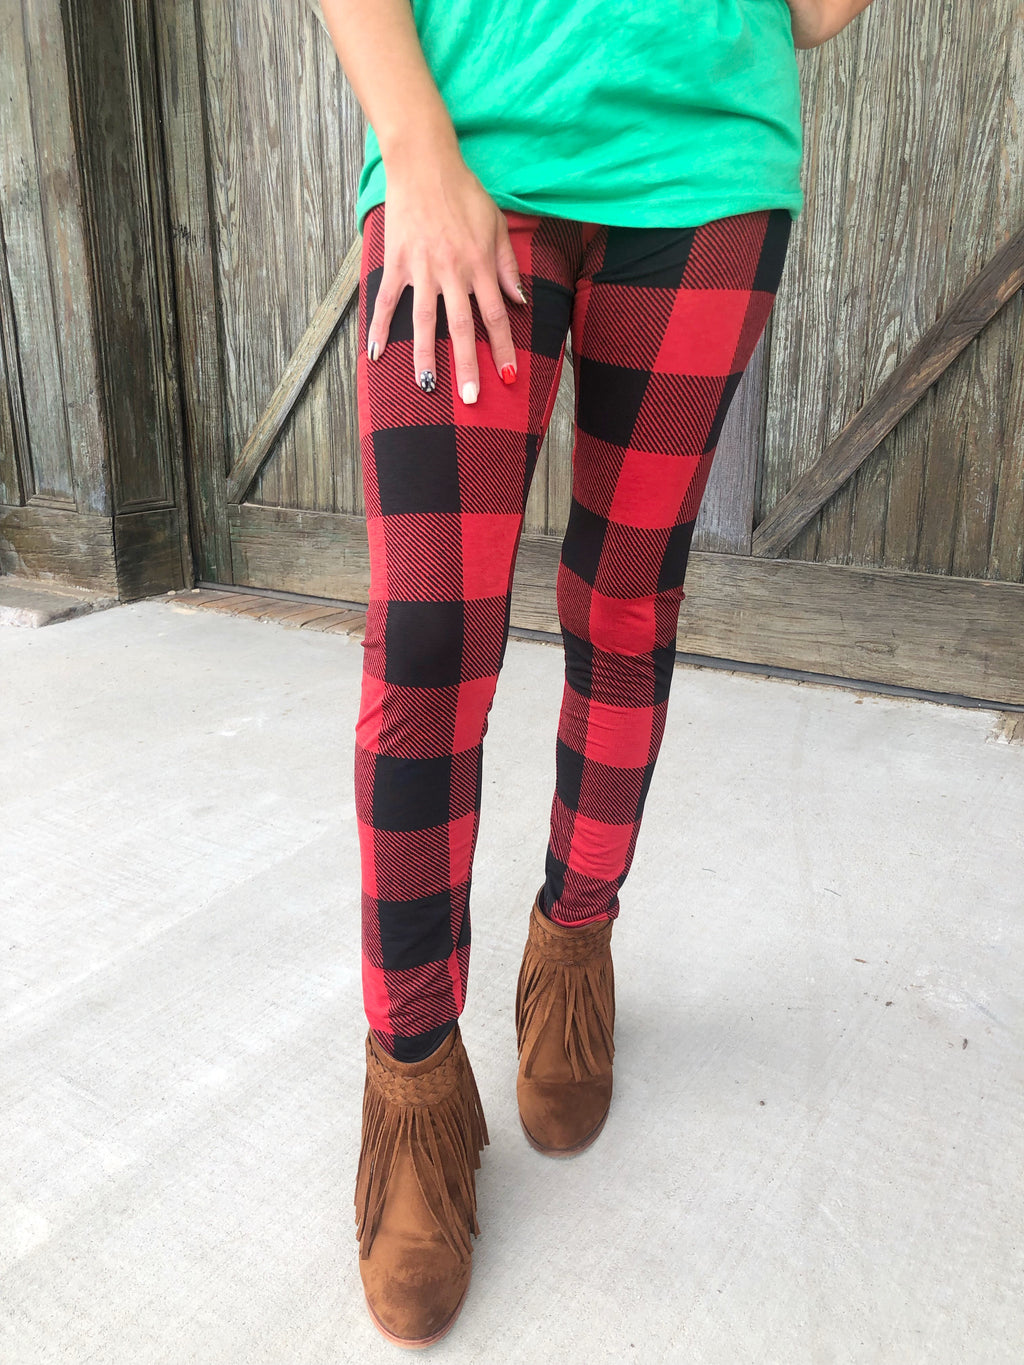 The Holly Jolly Leggings - Black & Red - West Avenue